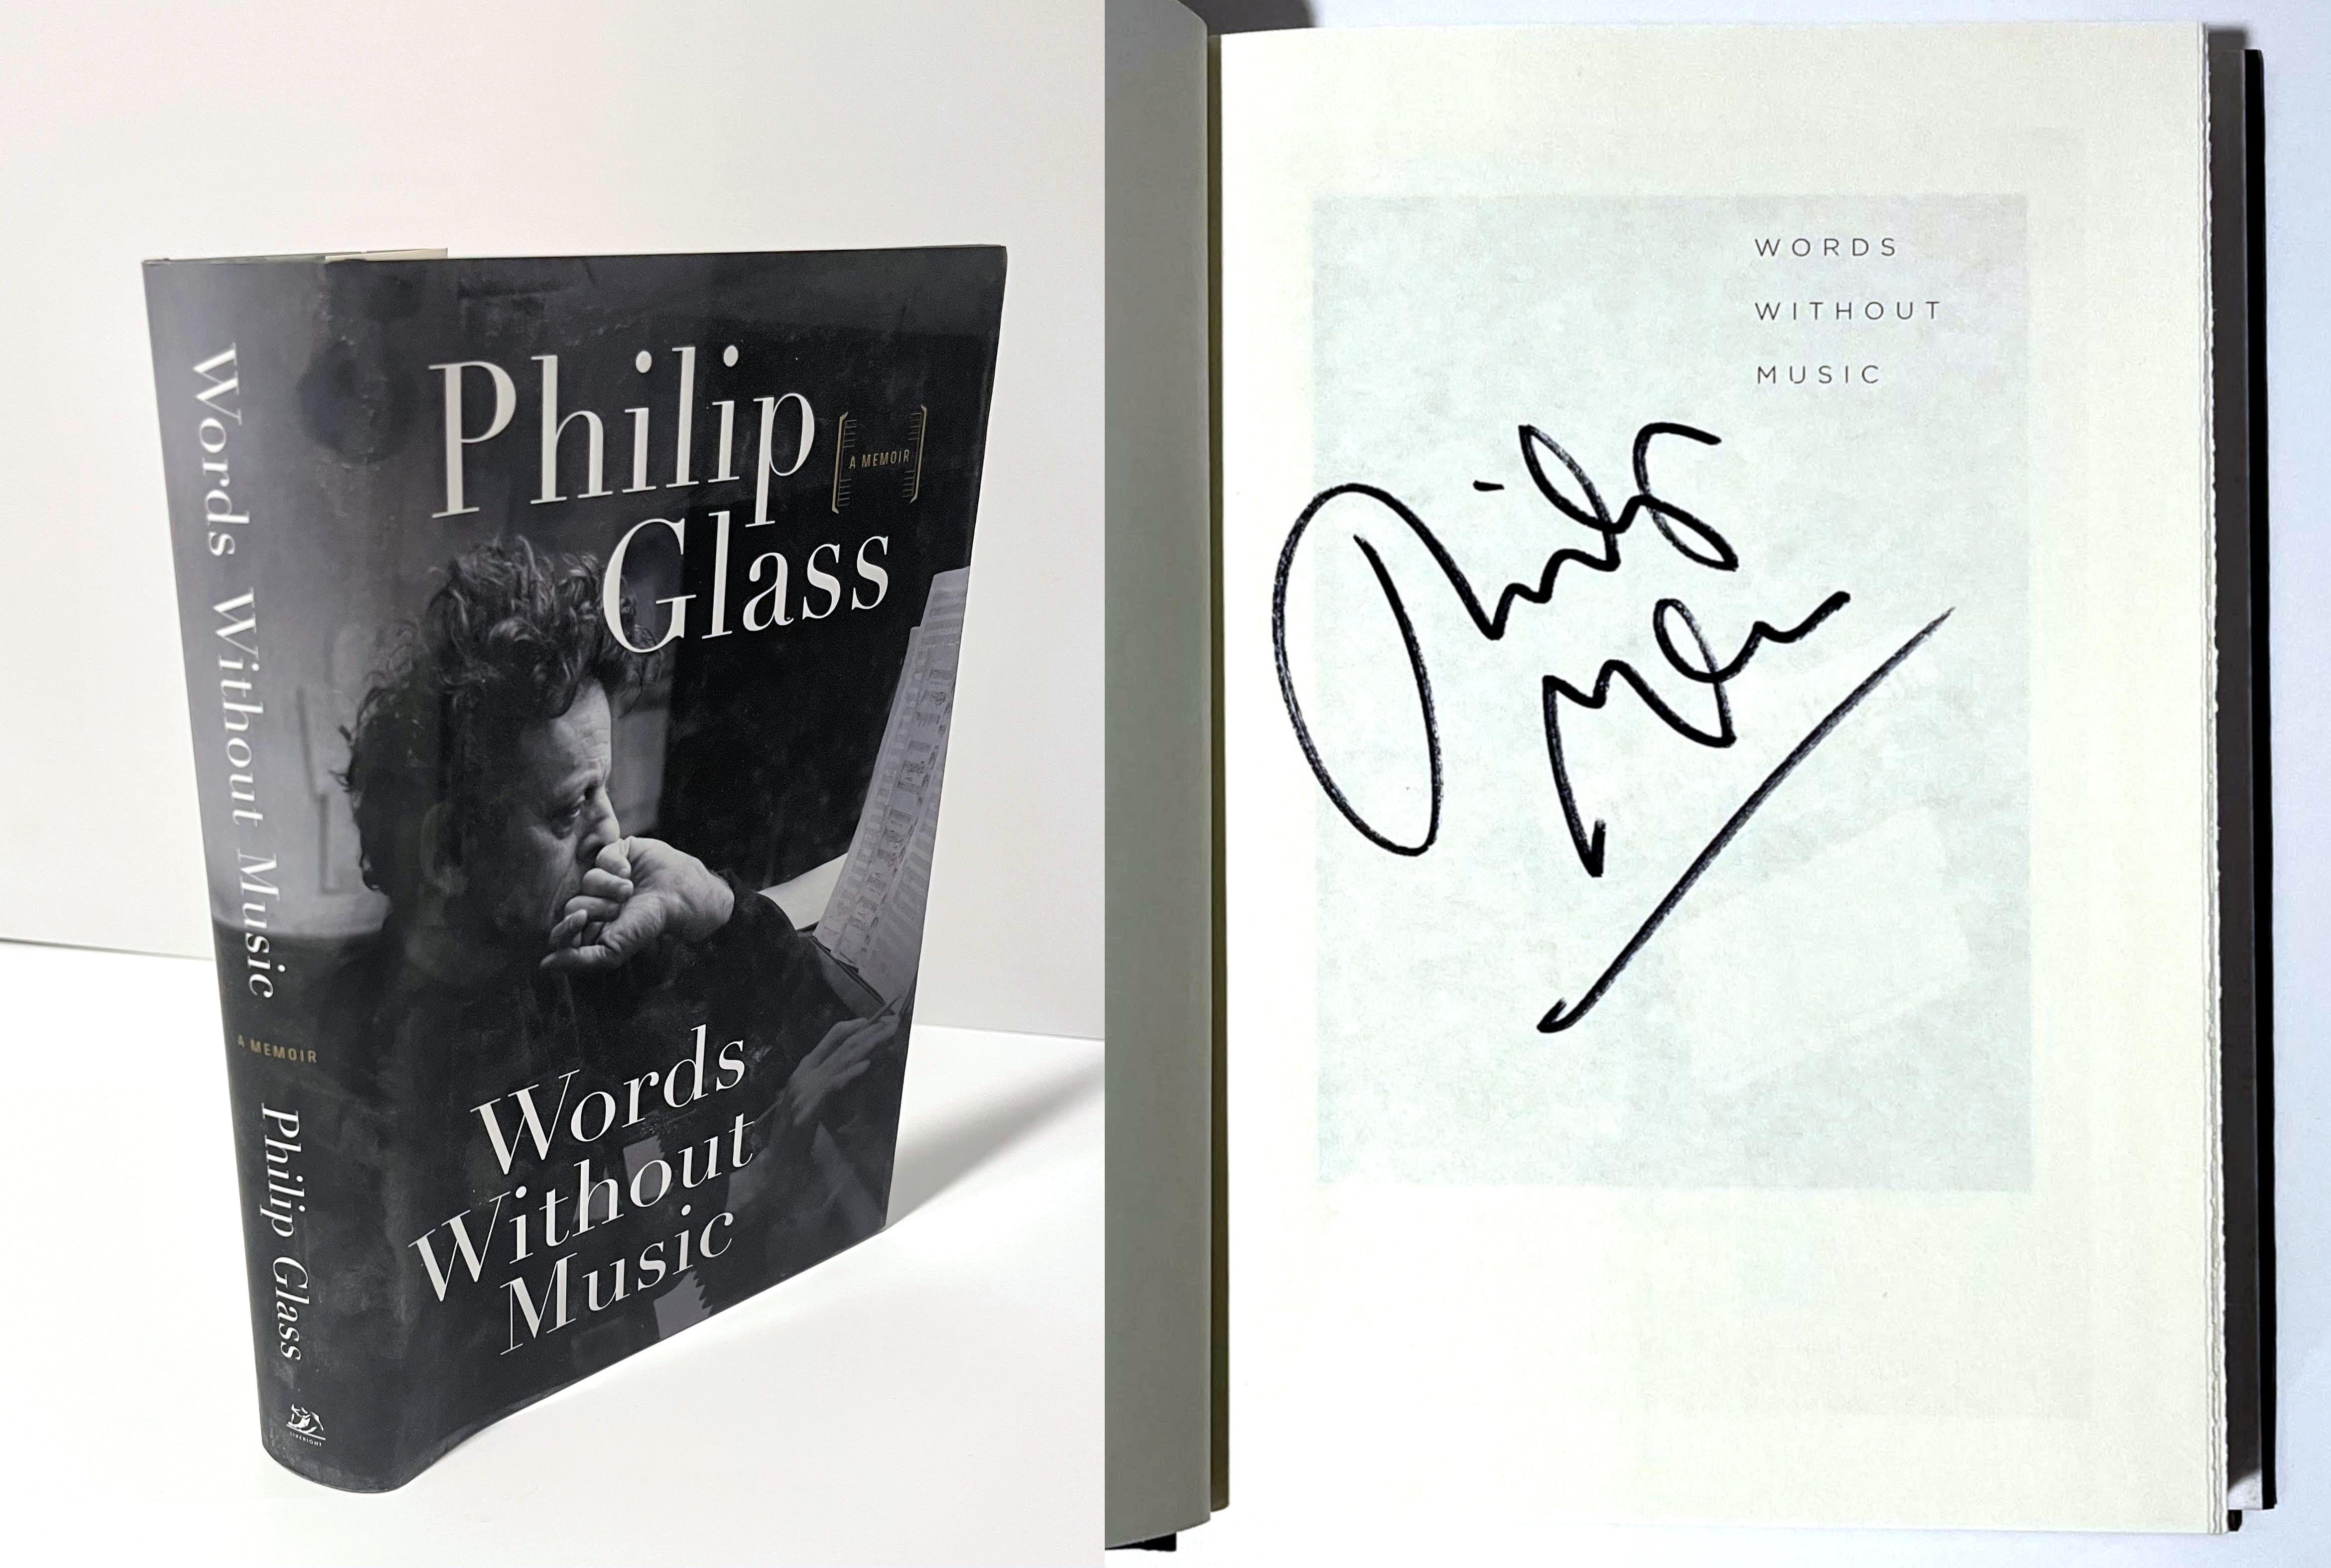 Monograph: Philip Glass Words Without Music (book hand signed by Philip Glass)